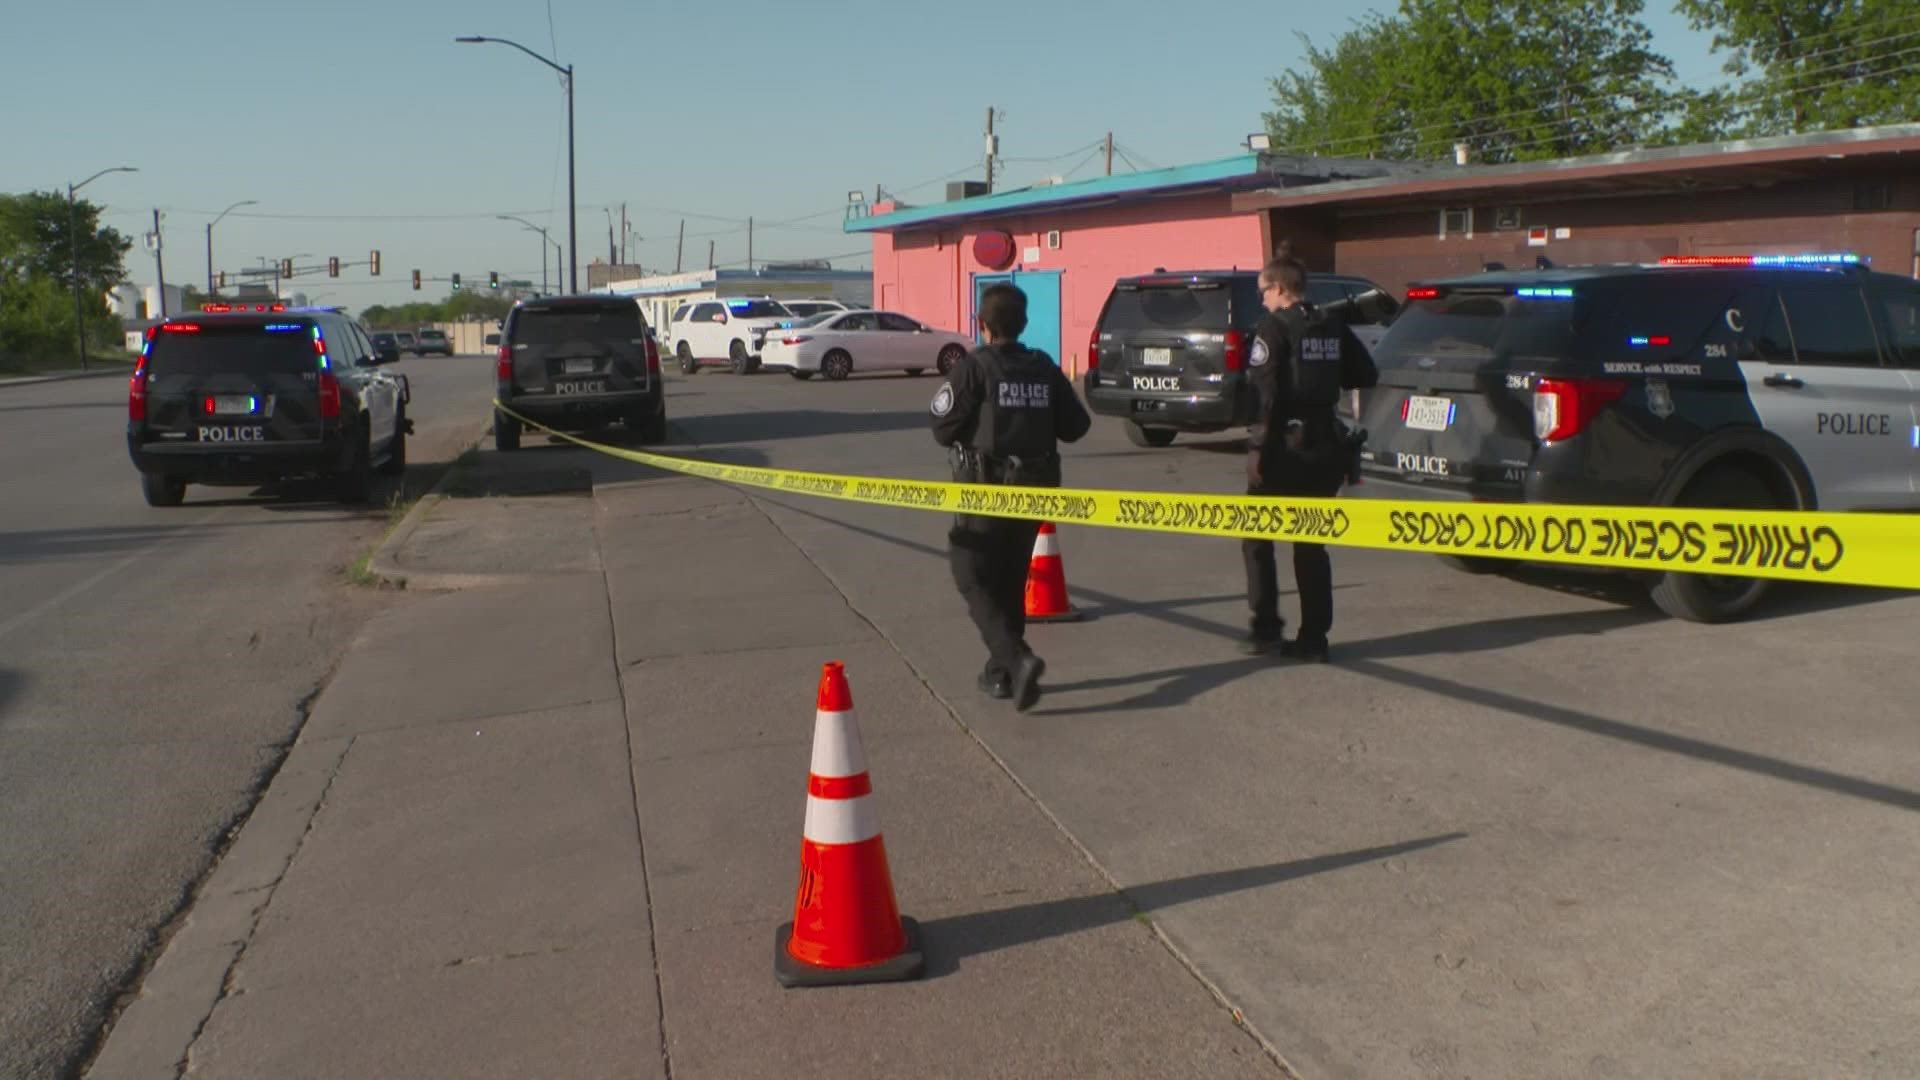 Three people were shot inside a Fort Worth convenience store Thursday afternoon, the second convenience store shooting within 24 hours in the city, police told WFAA.